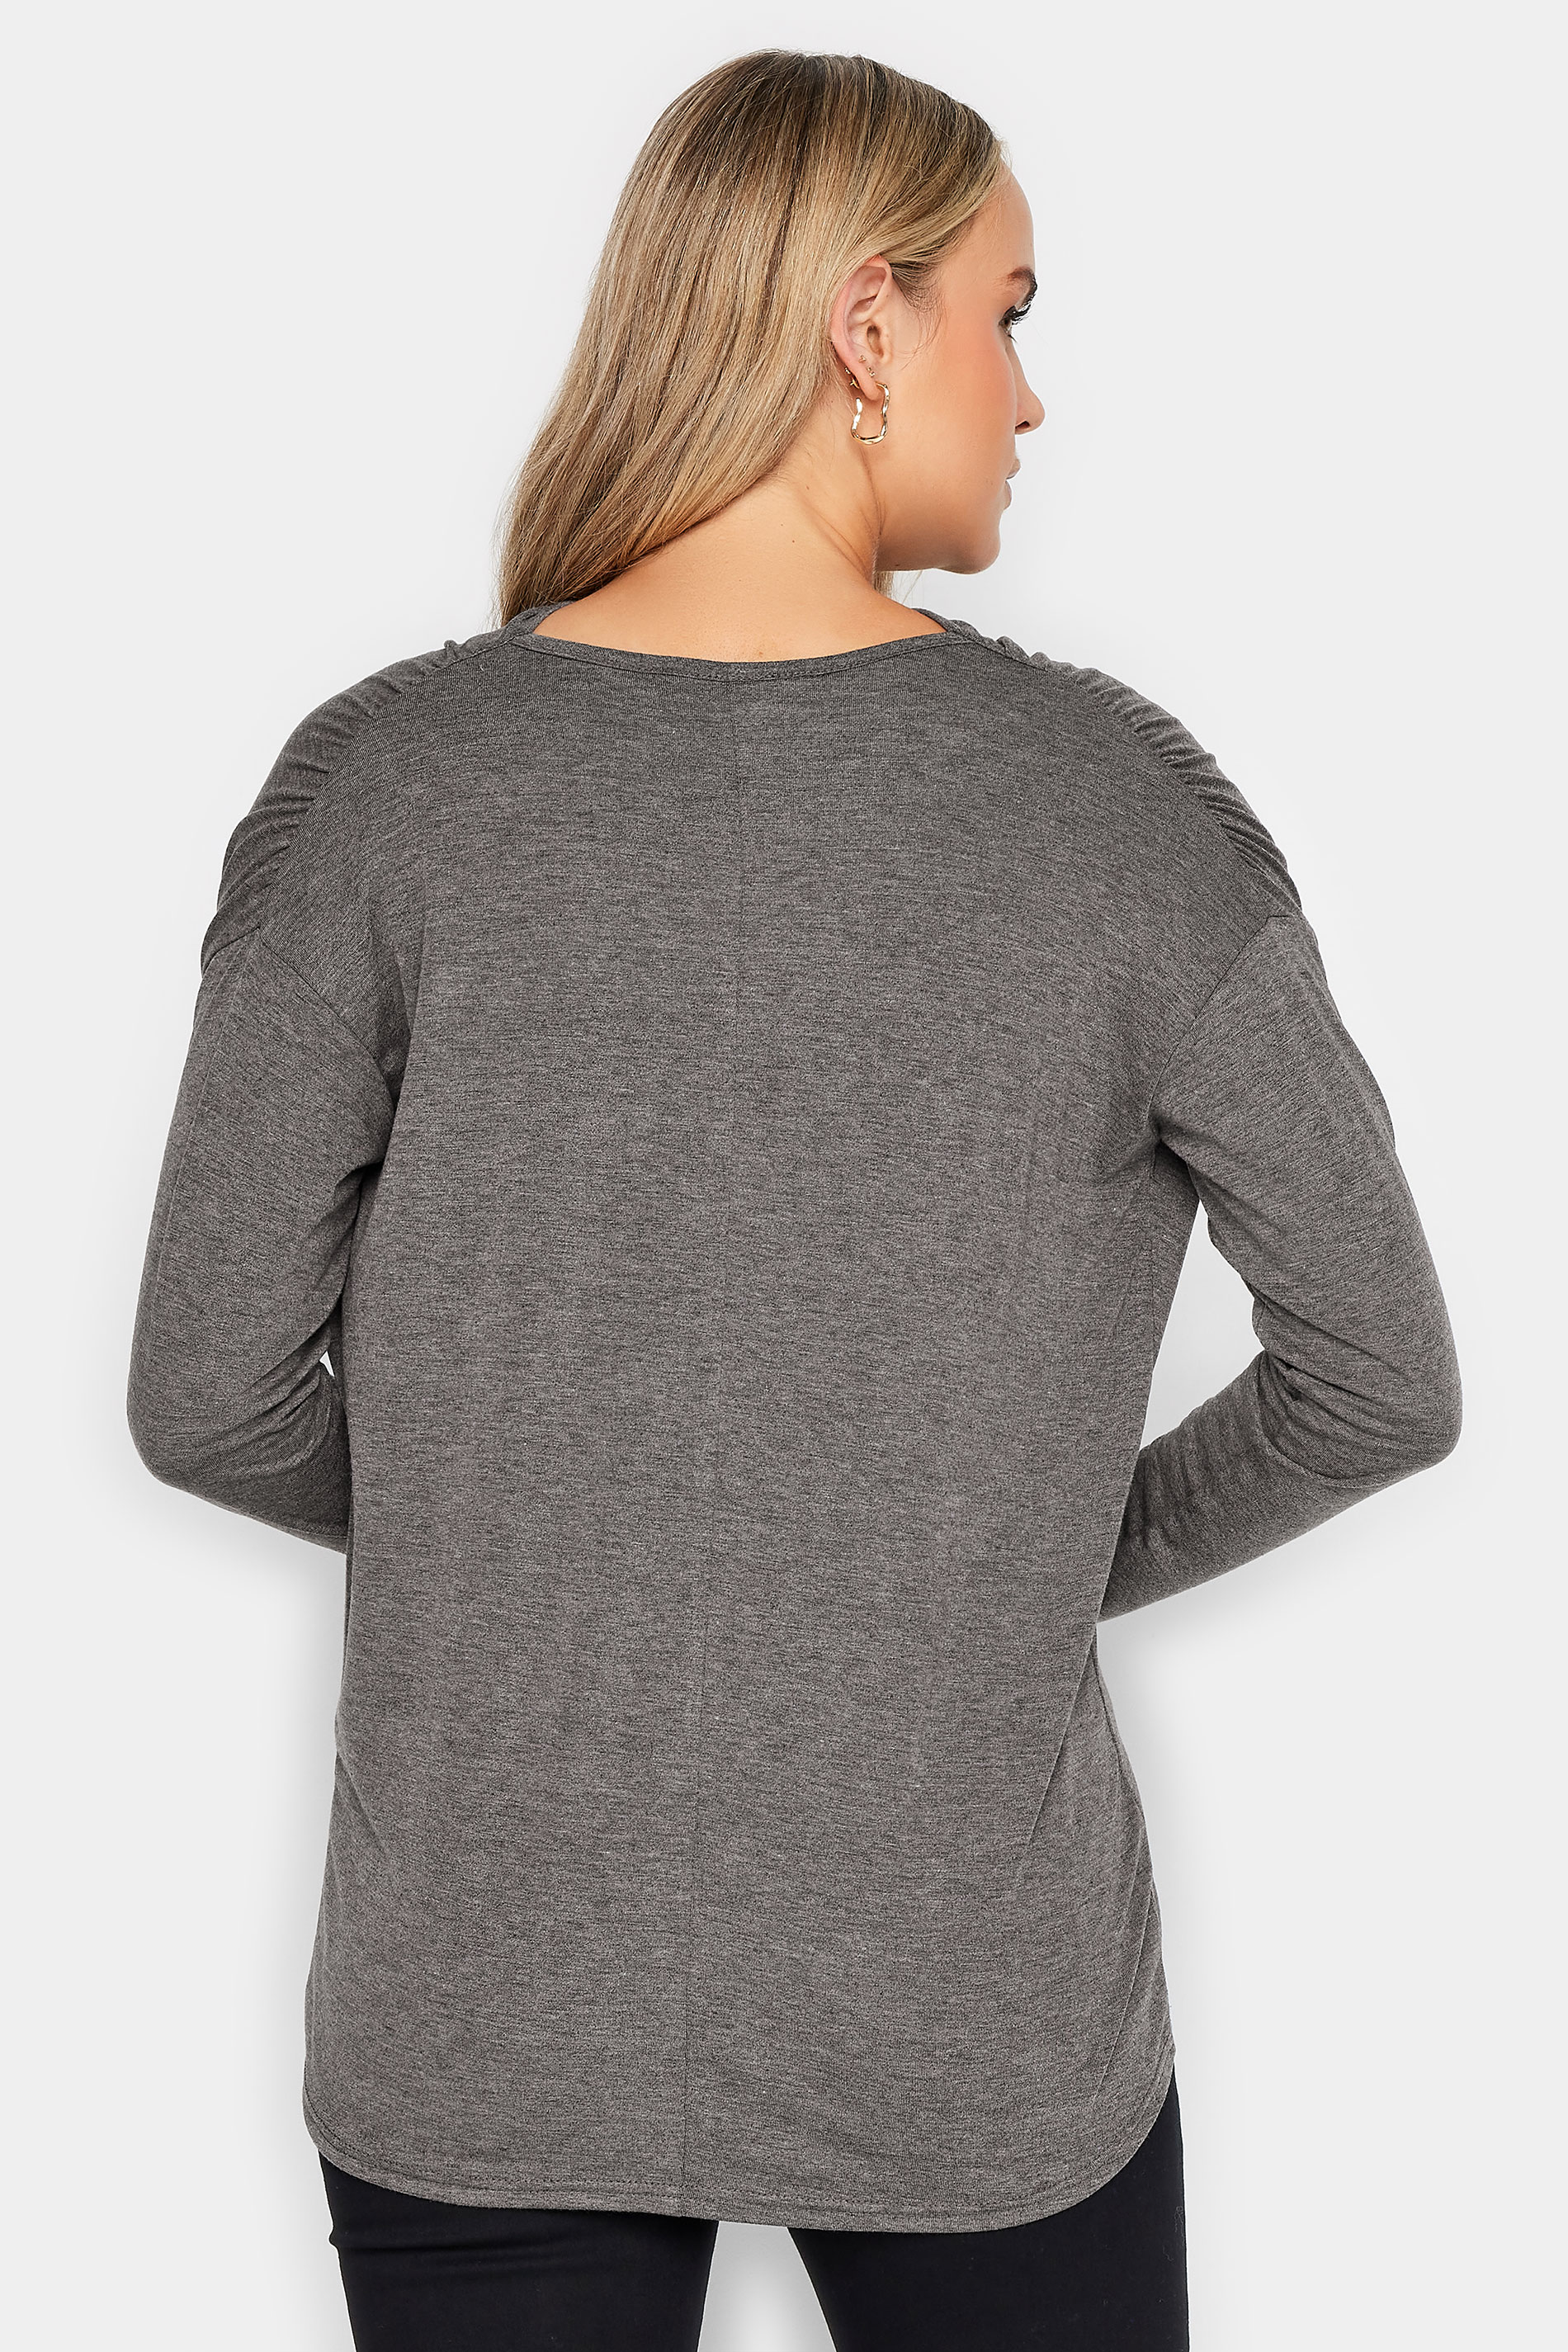 LTS Tall Women's Charcoal Grey Ruched Neck Top | Long Tall Sally 3